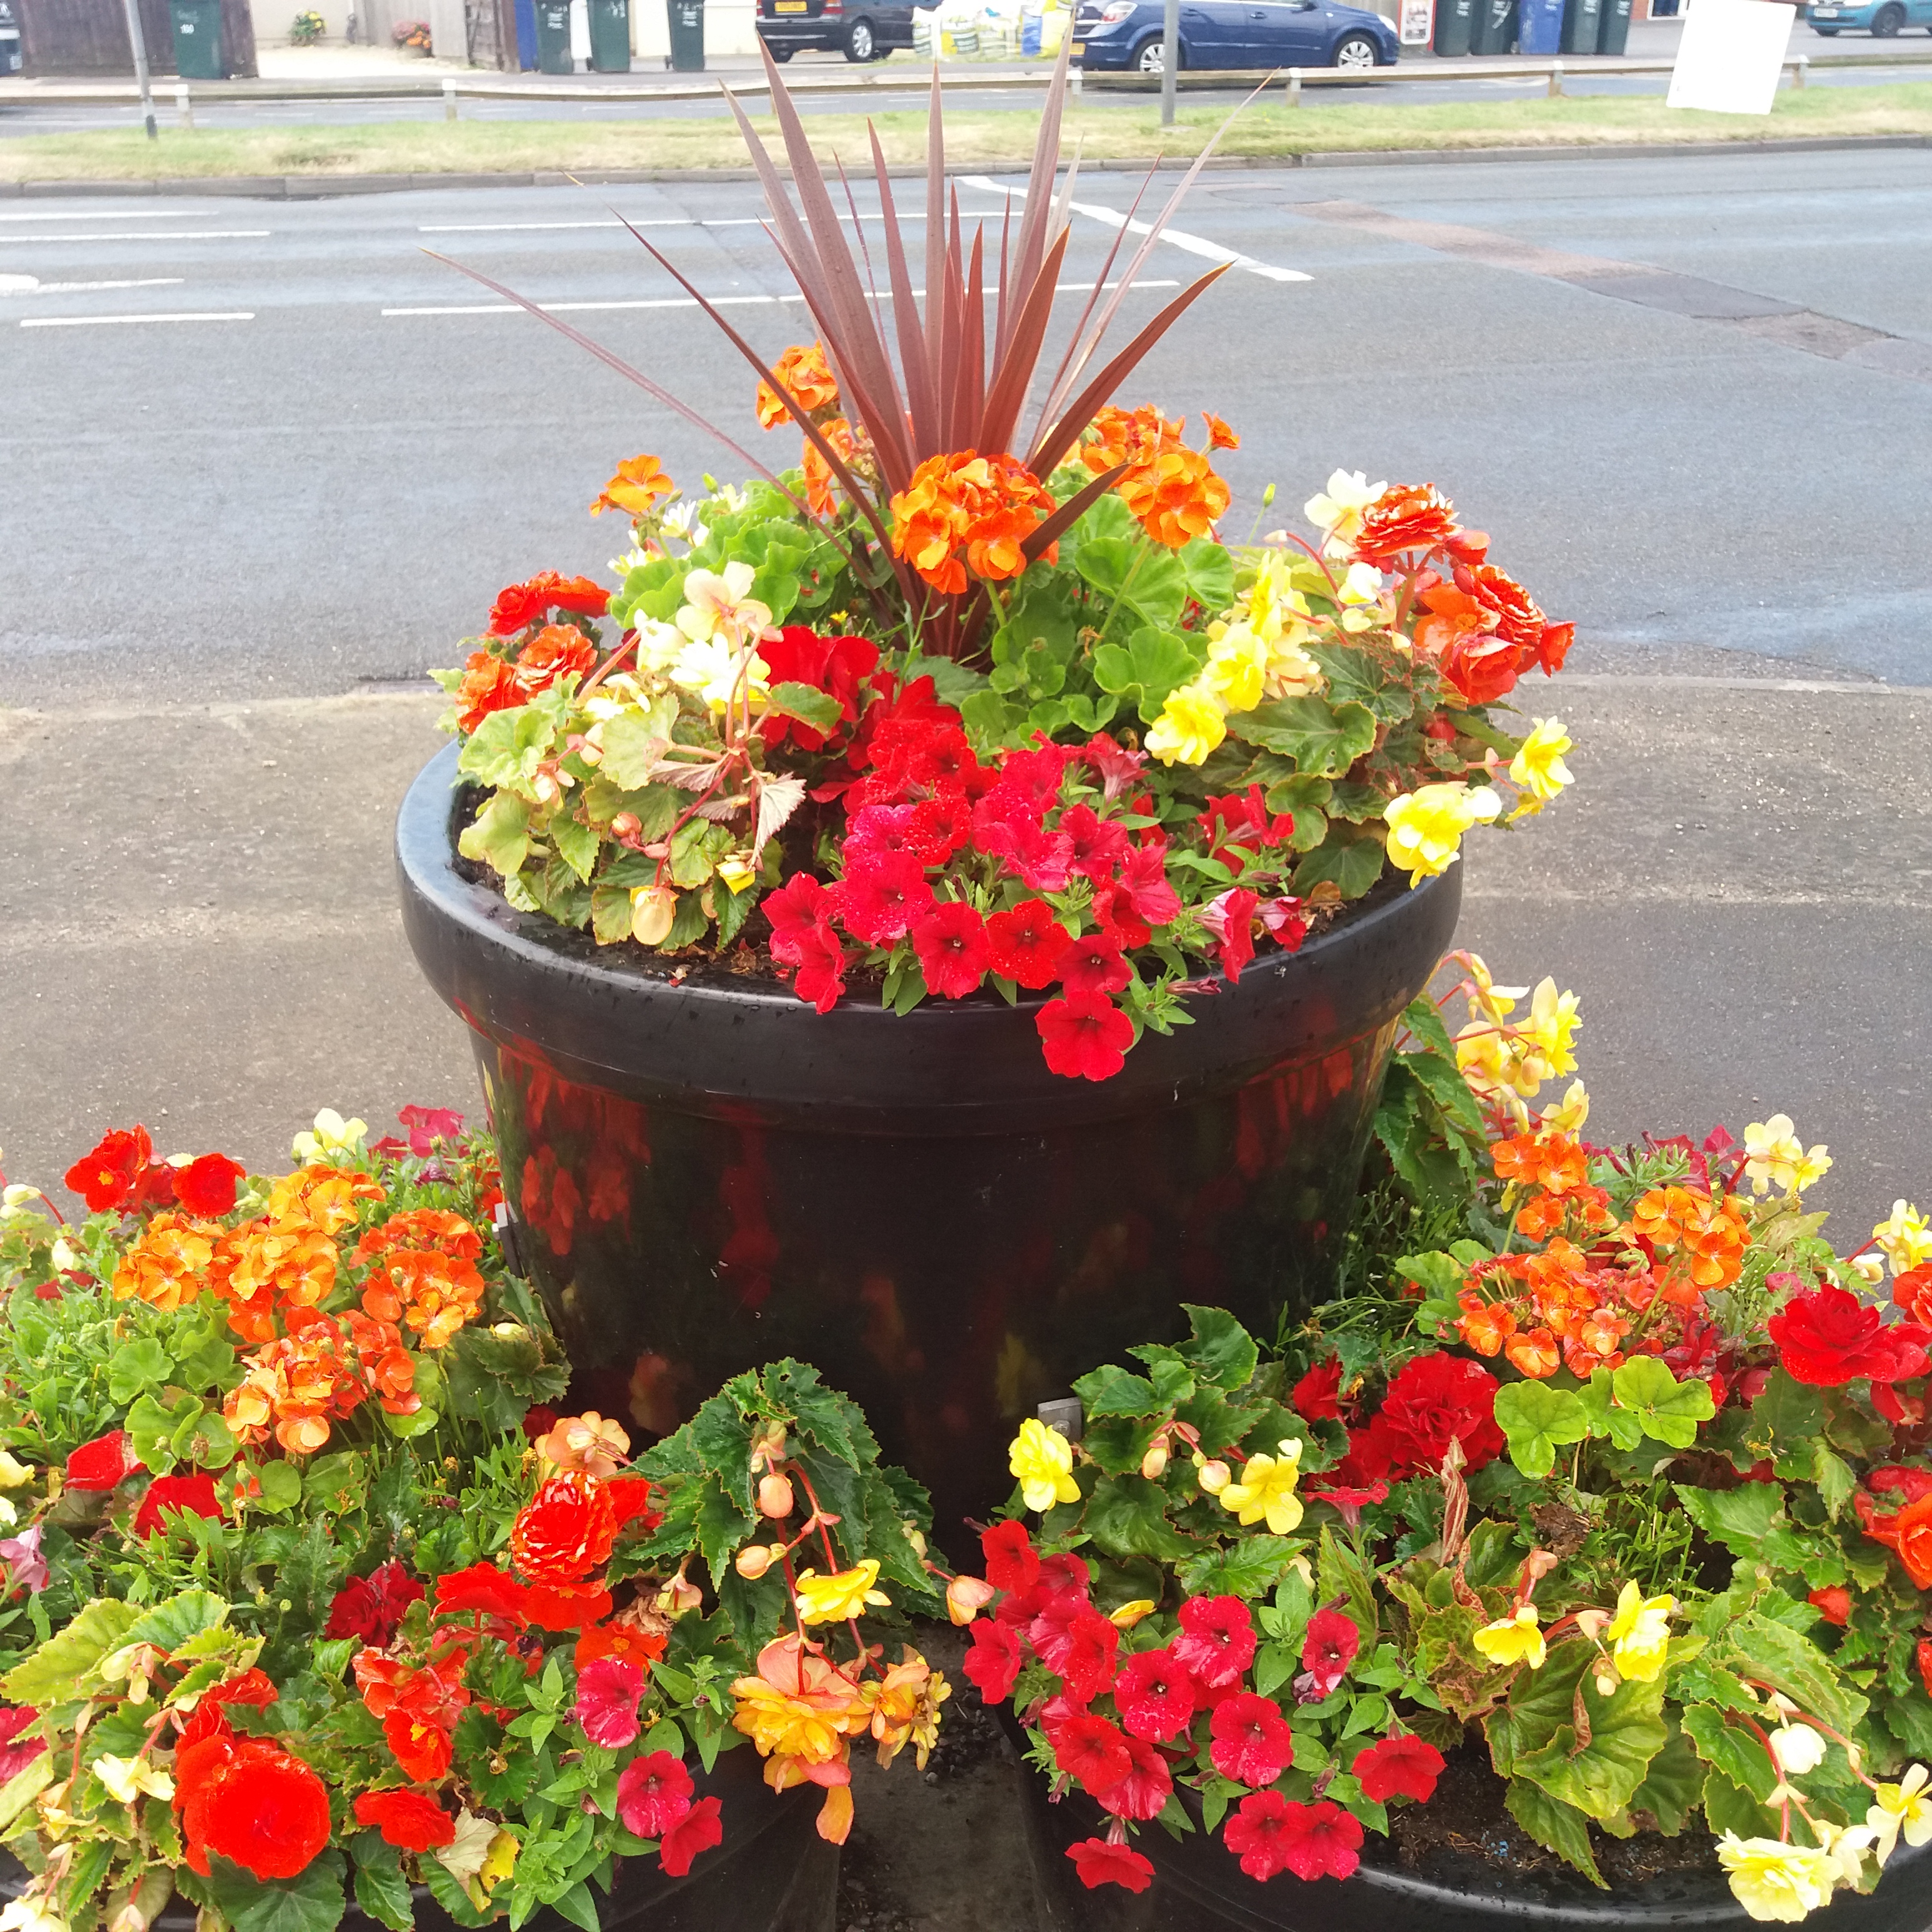 3 baskets of red and yellow flowers